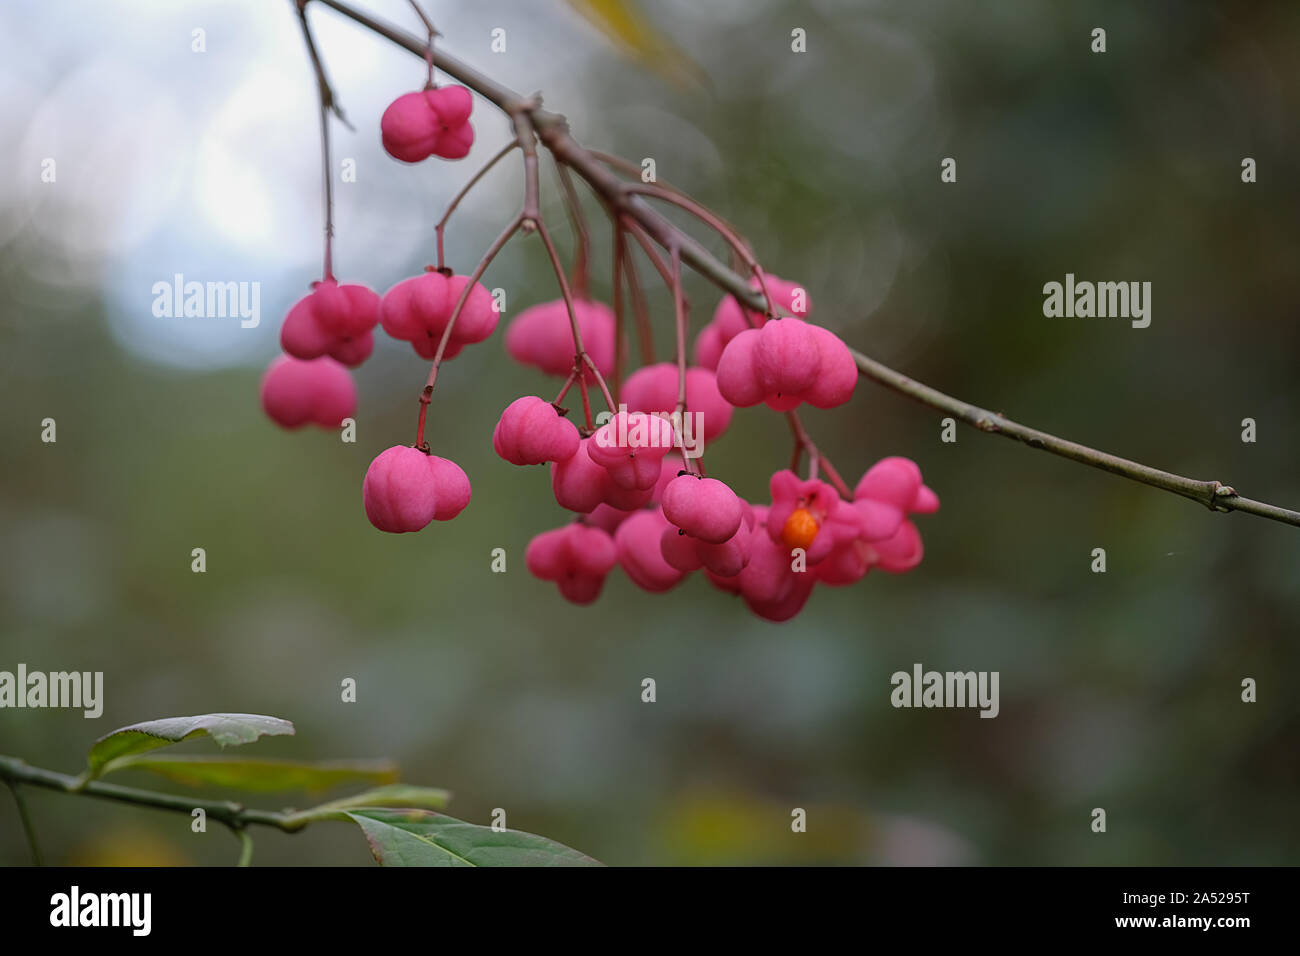 berries of a spindle shrub in front of blurred green background a twig with leaves in the foreground Stock Photo